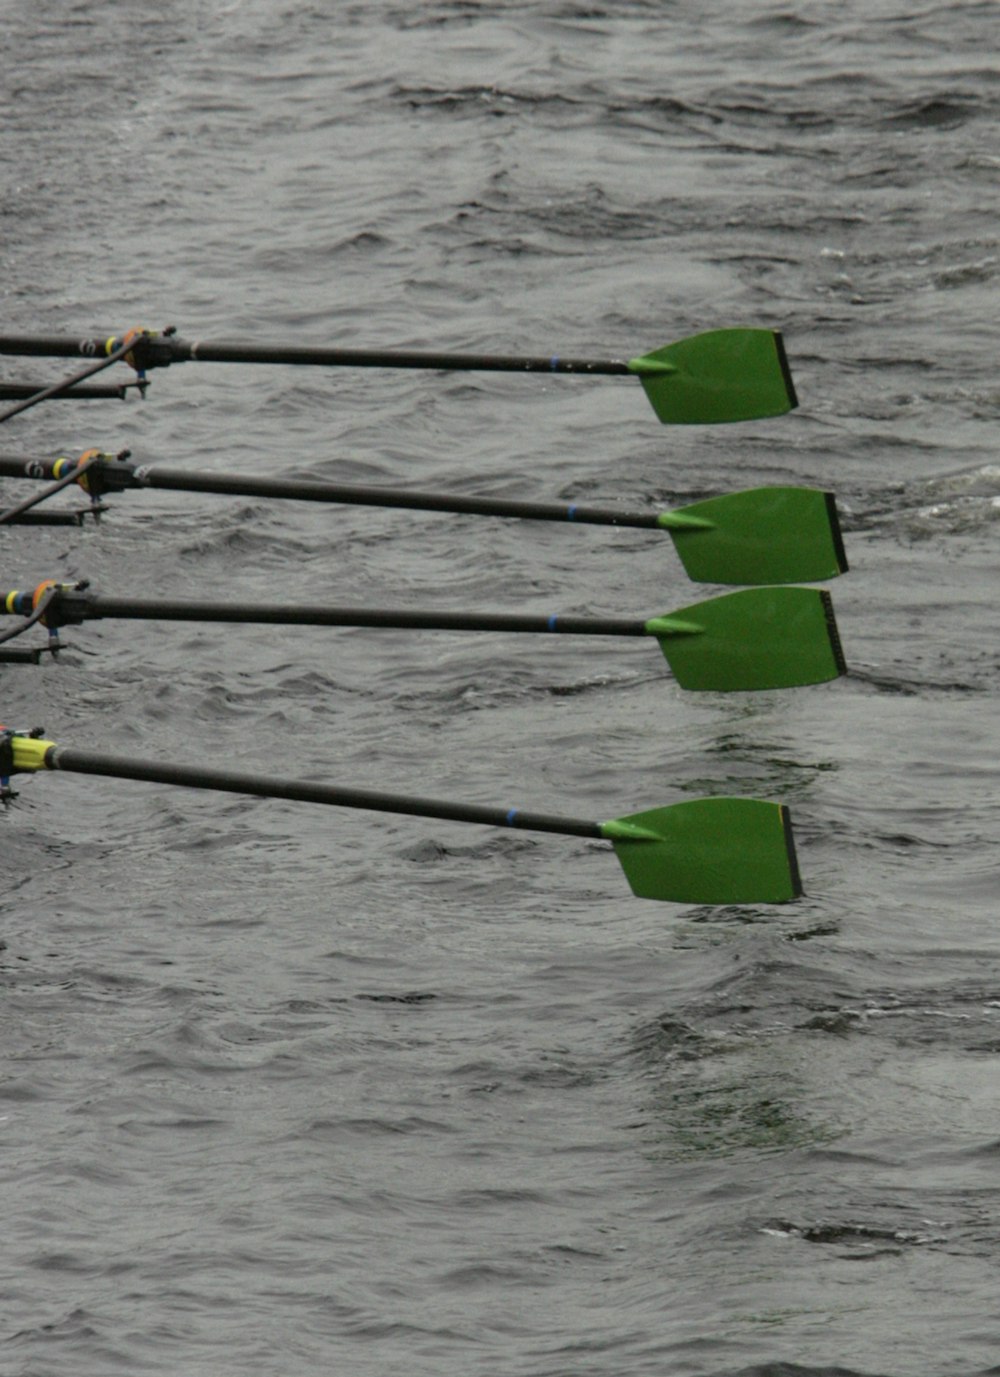 a row of green paddles in the water